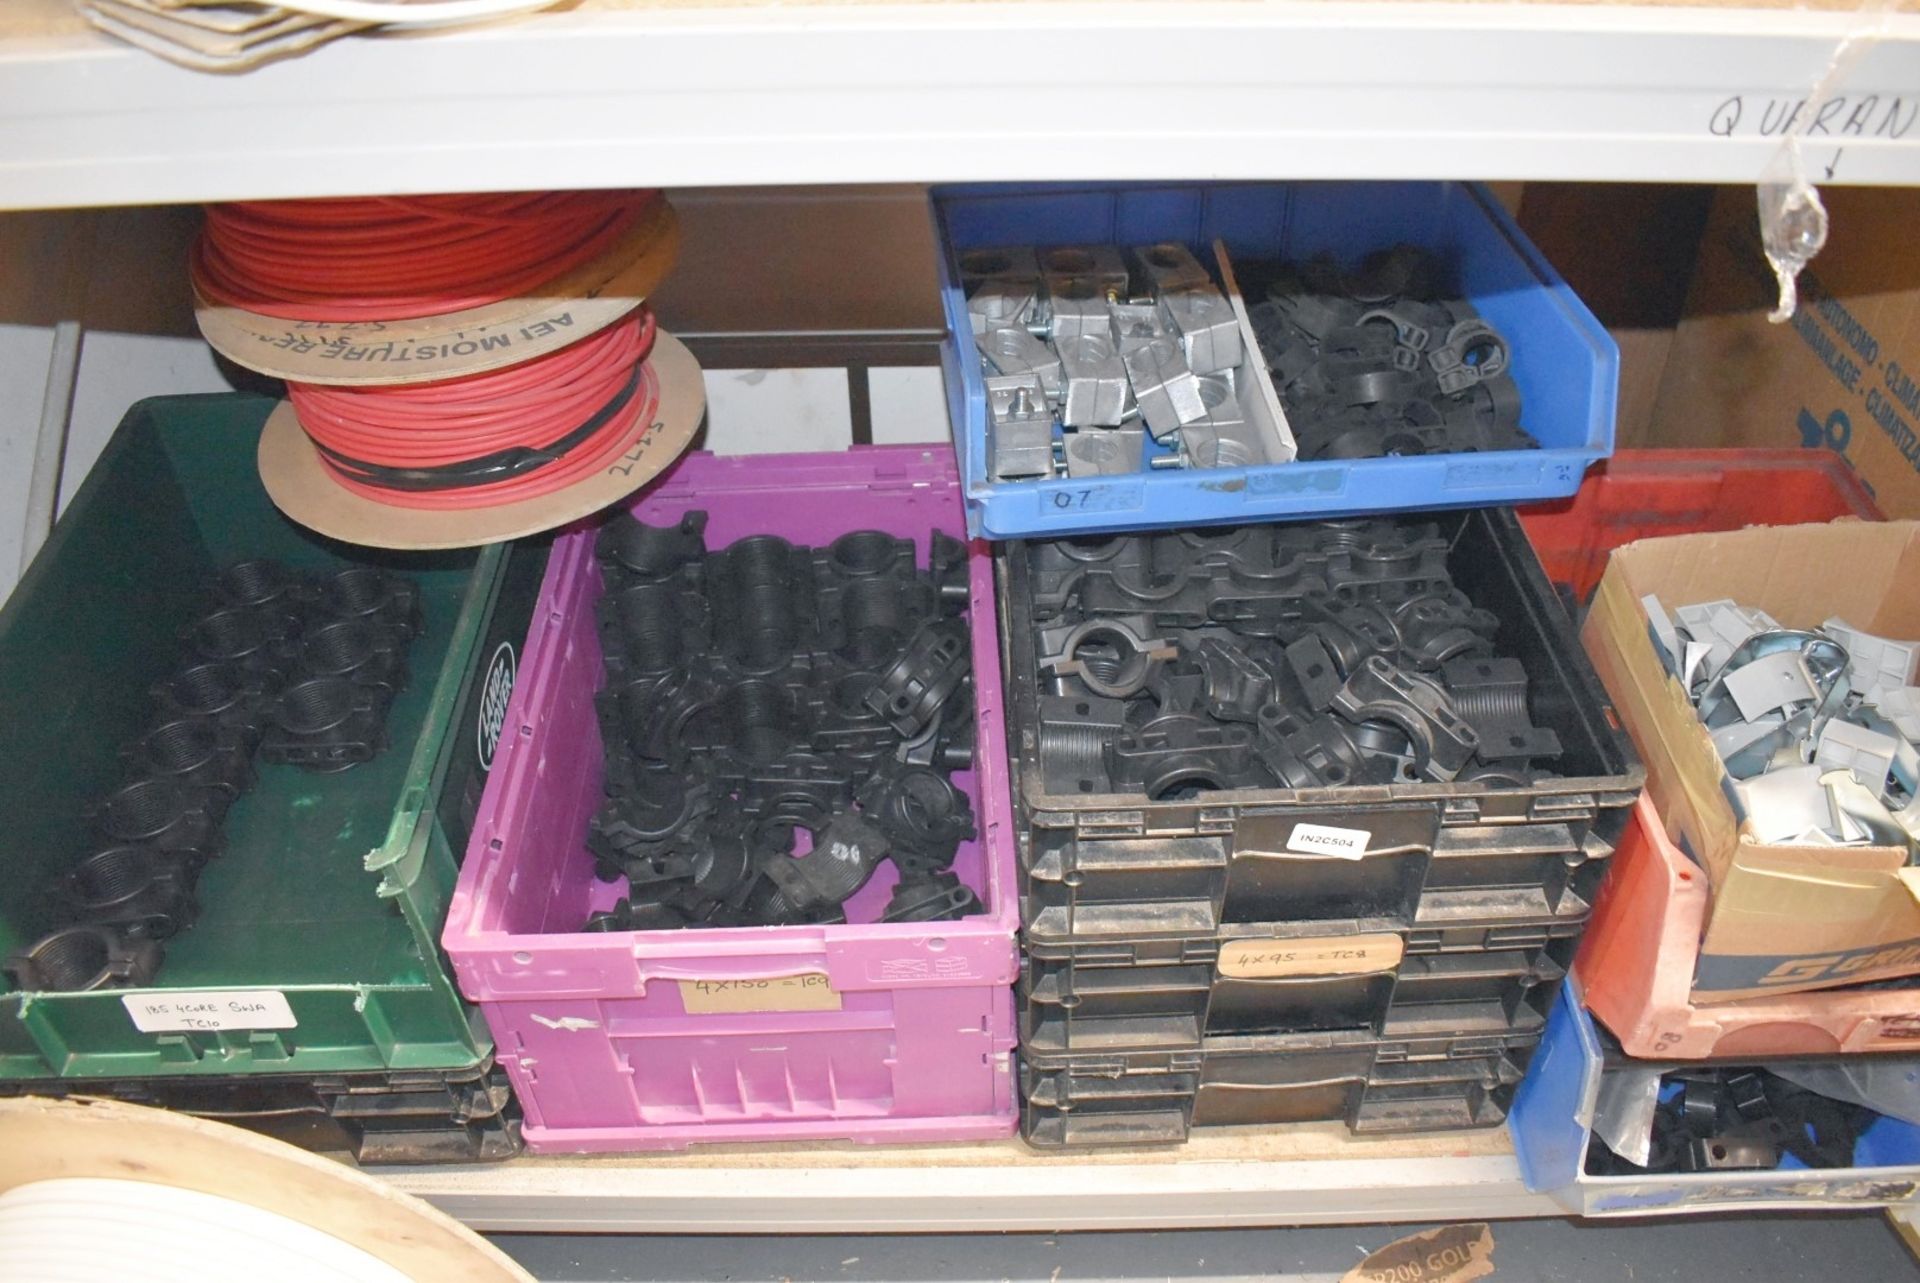 9 x Storage Containers Containing a Variety of Cable and Pipe Cleats - Unused Stock!